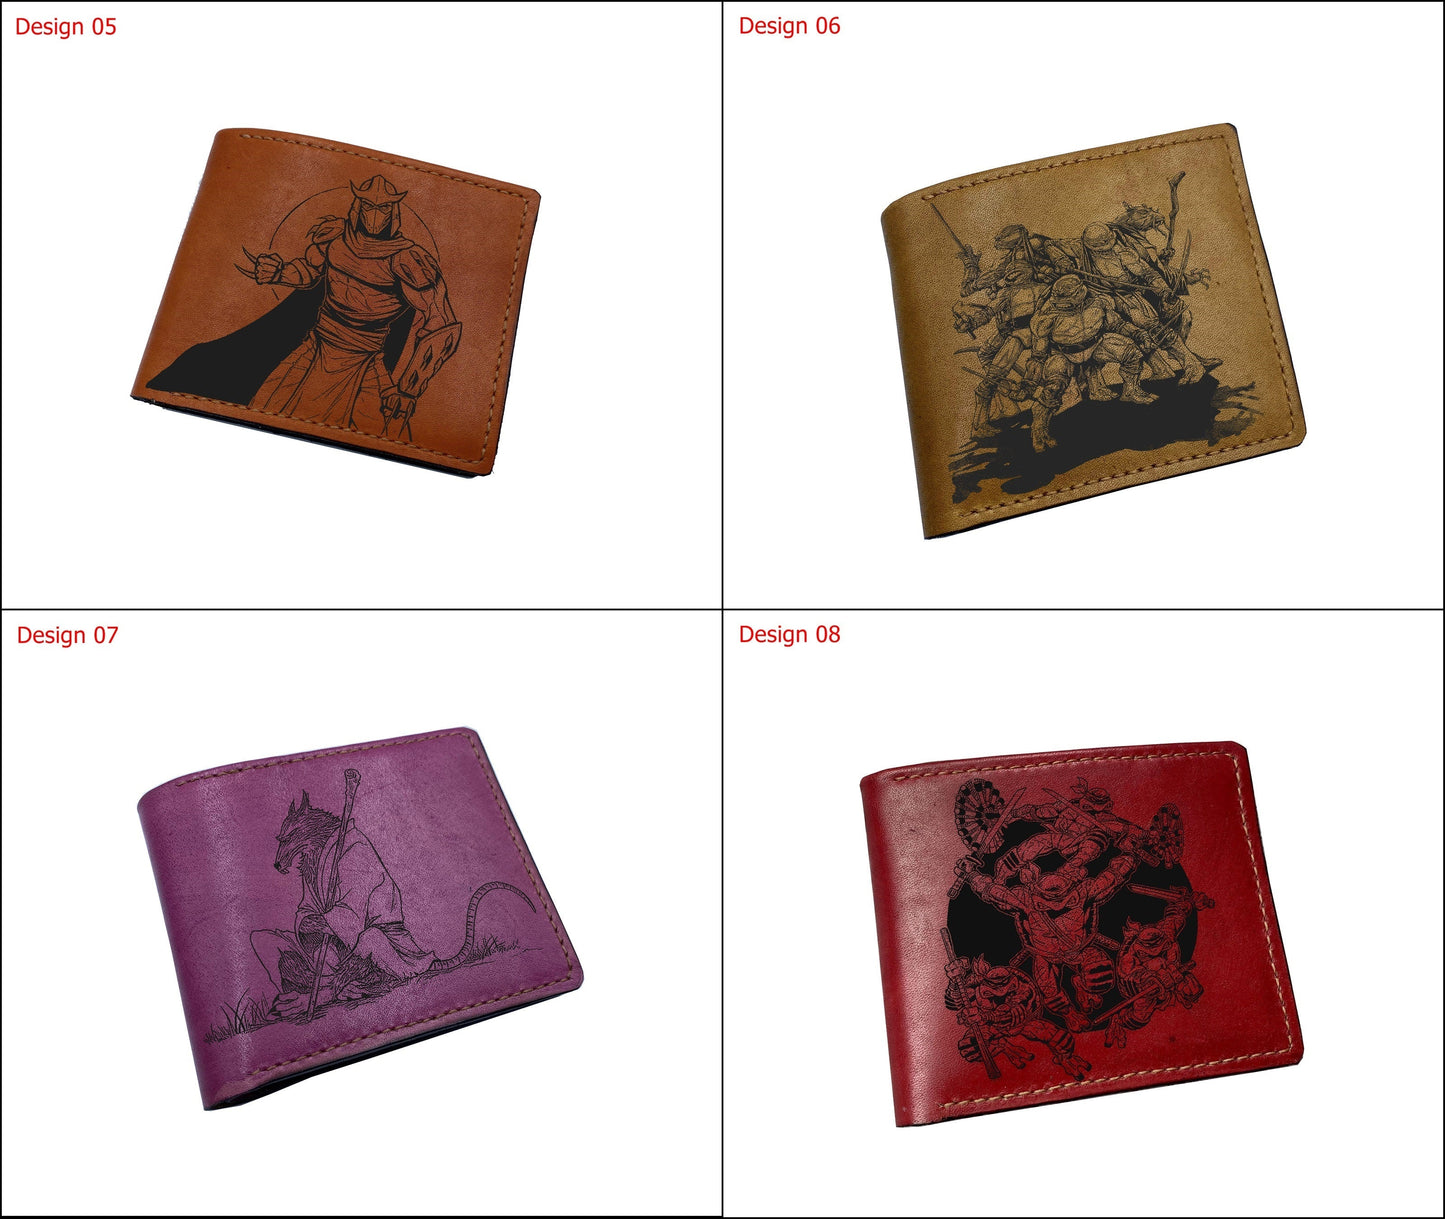 Mayan Corner - Personalized genuine leather handmade wallet, leather gift ideas for him, ninja turtle leather art wallet - 01112216